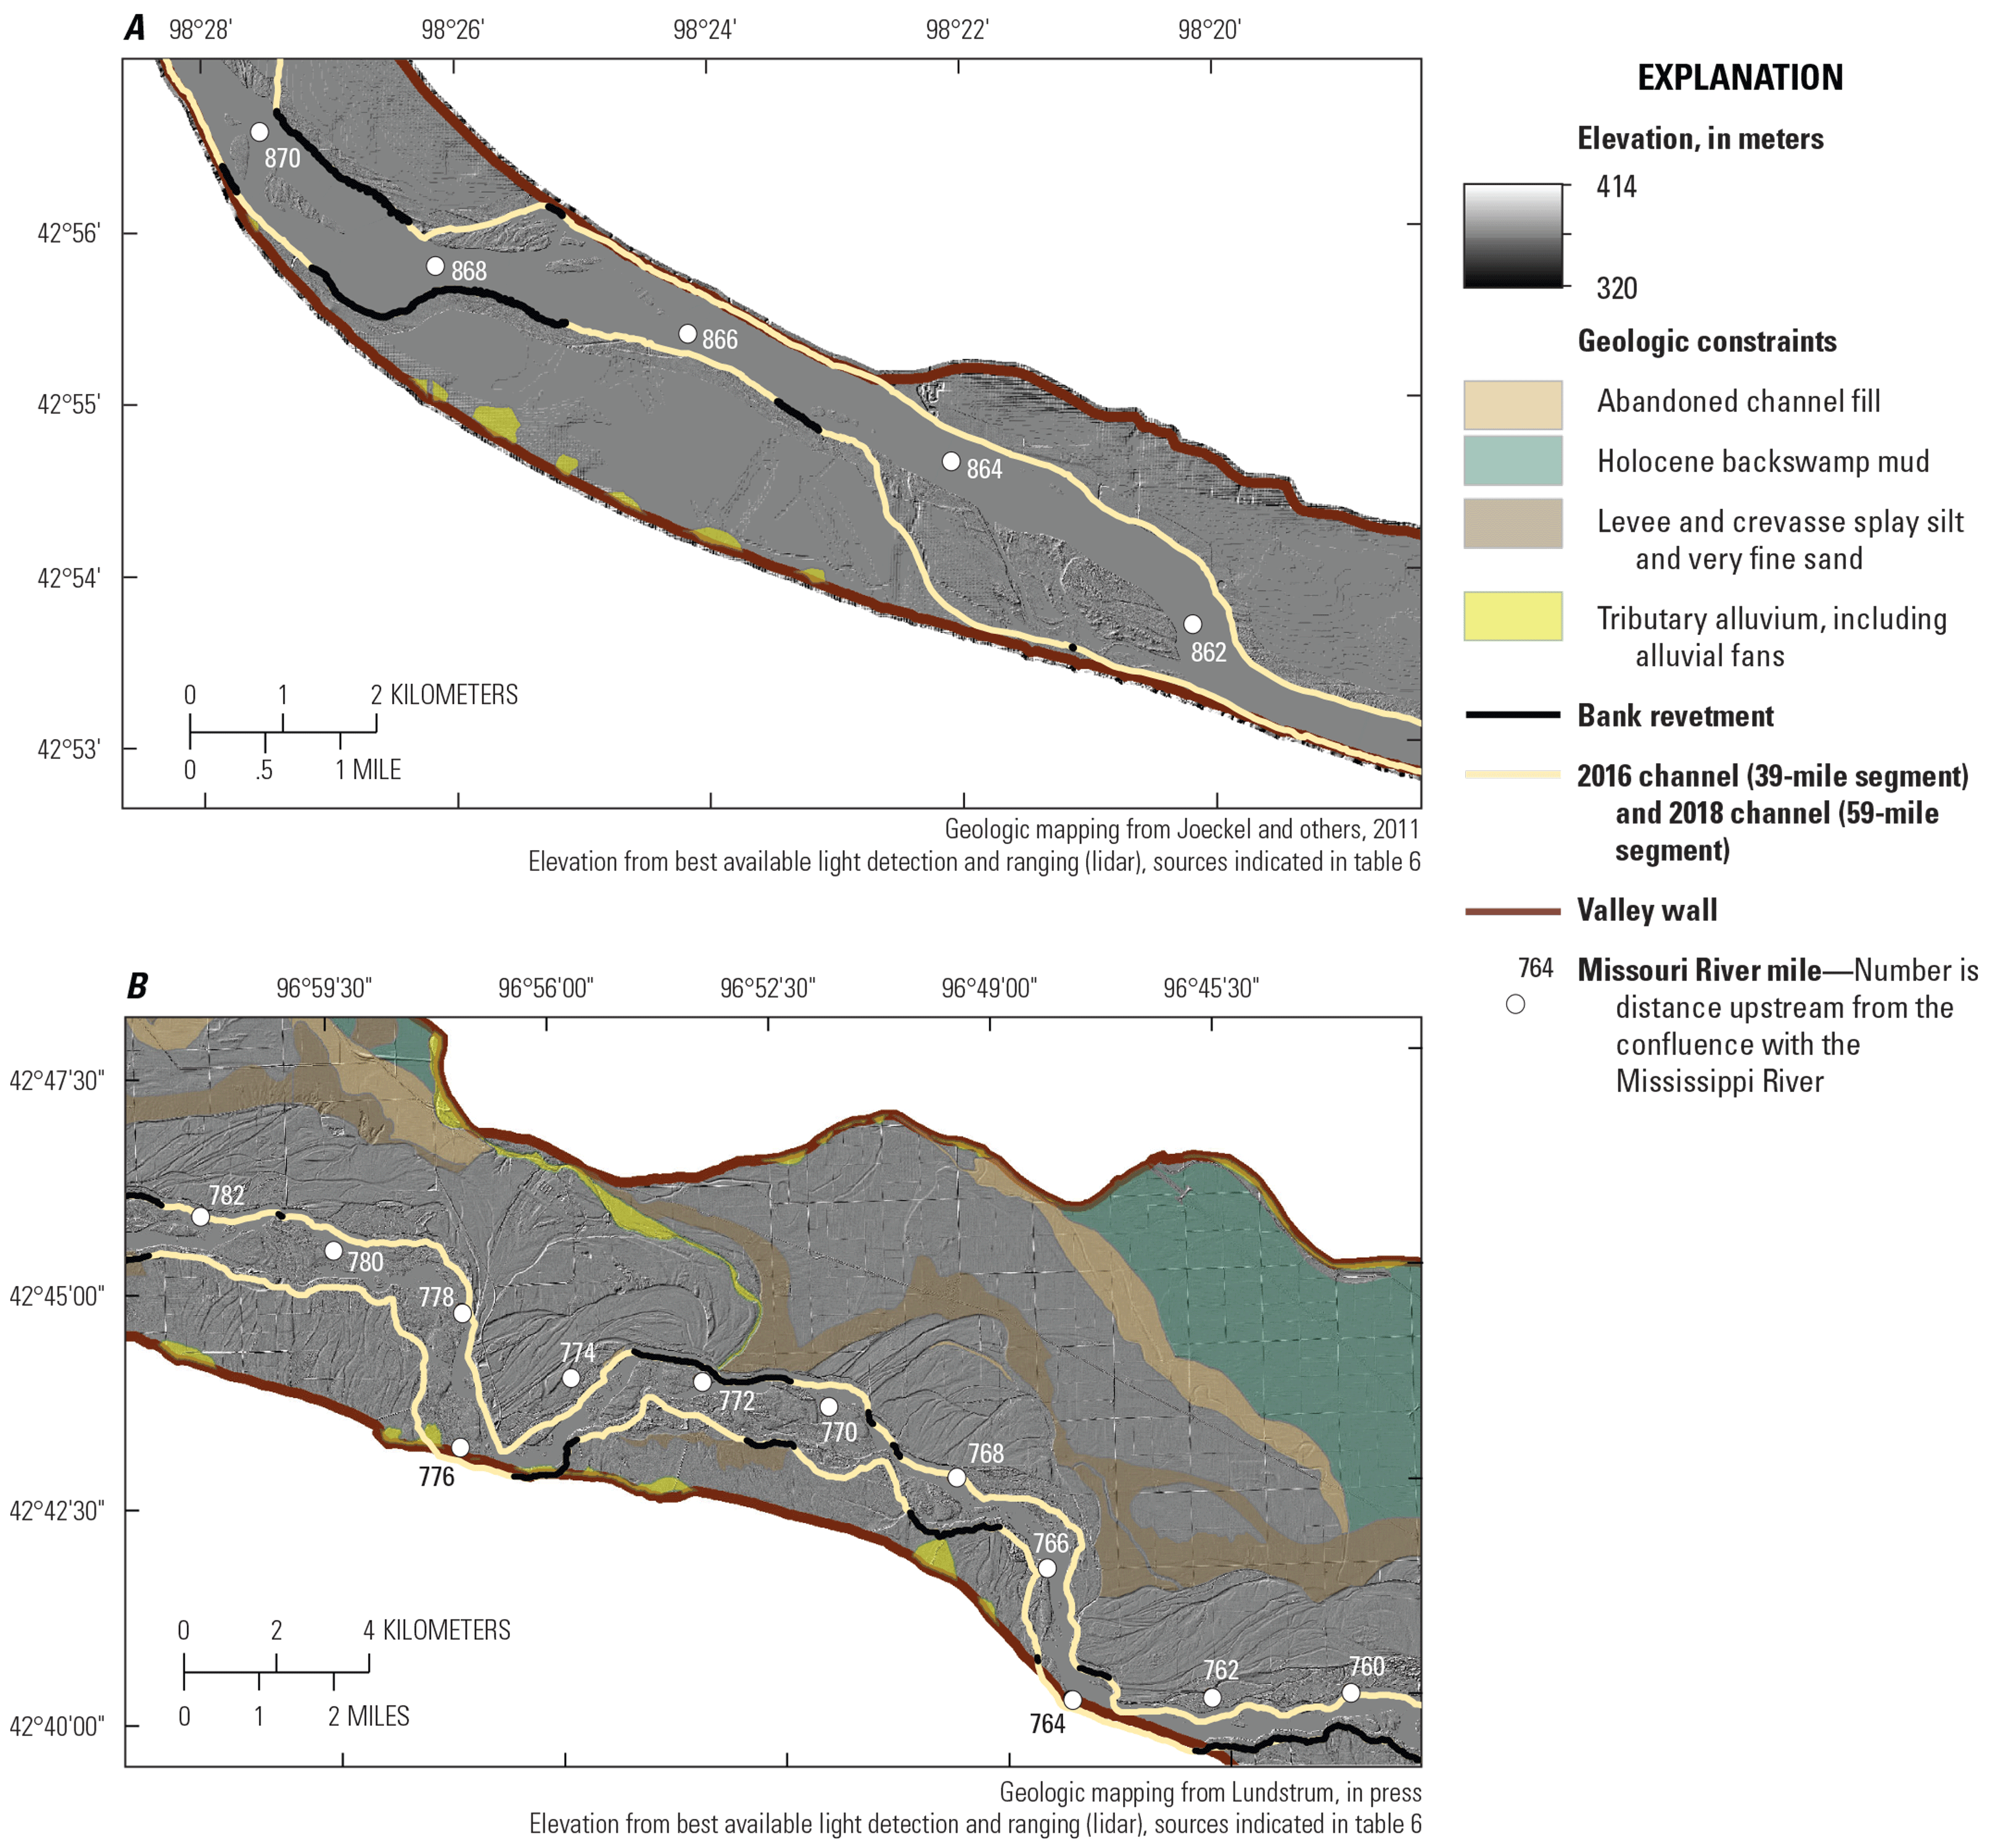 Two maps showing elevation and geologic constraints, with lines for bank revetment
                        2016, 2018 channels, symbols for river mile